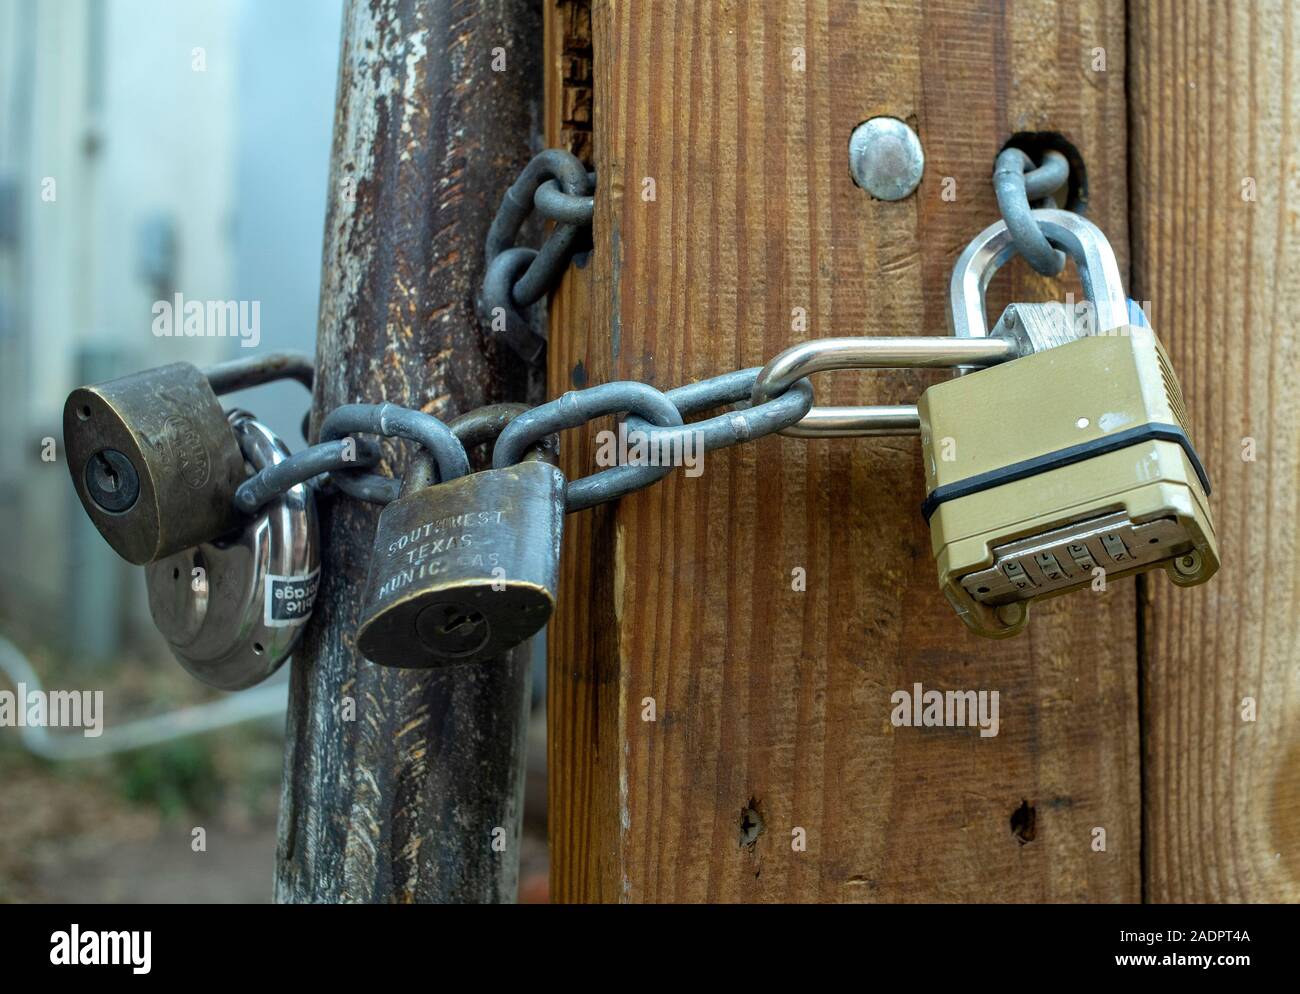 Locks on a private property gate. Stock Photo